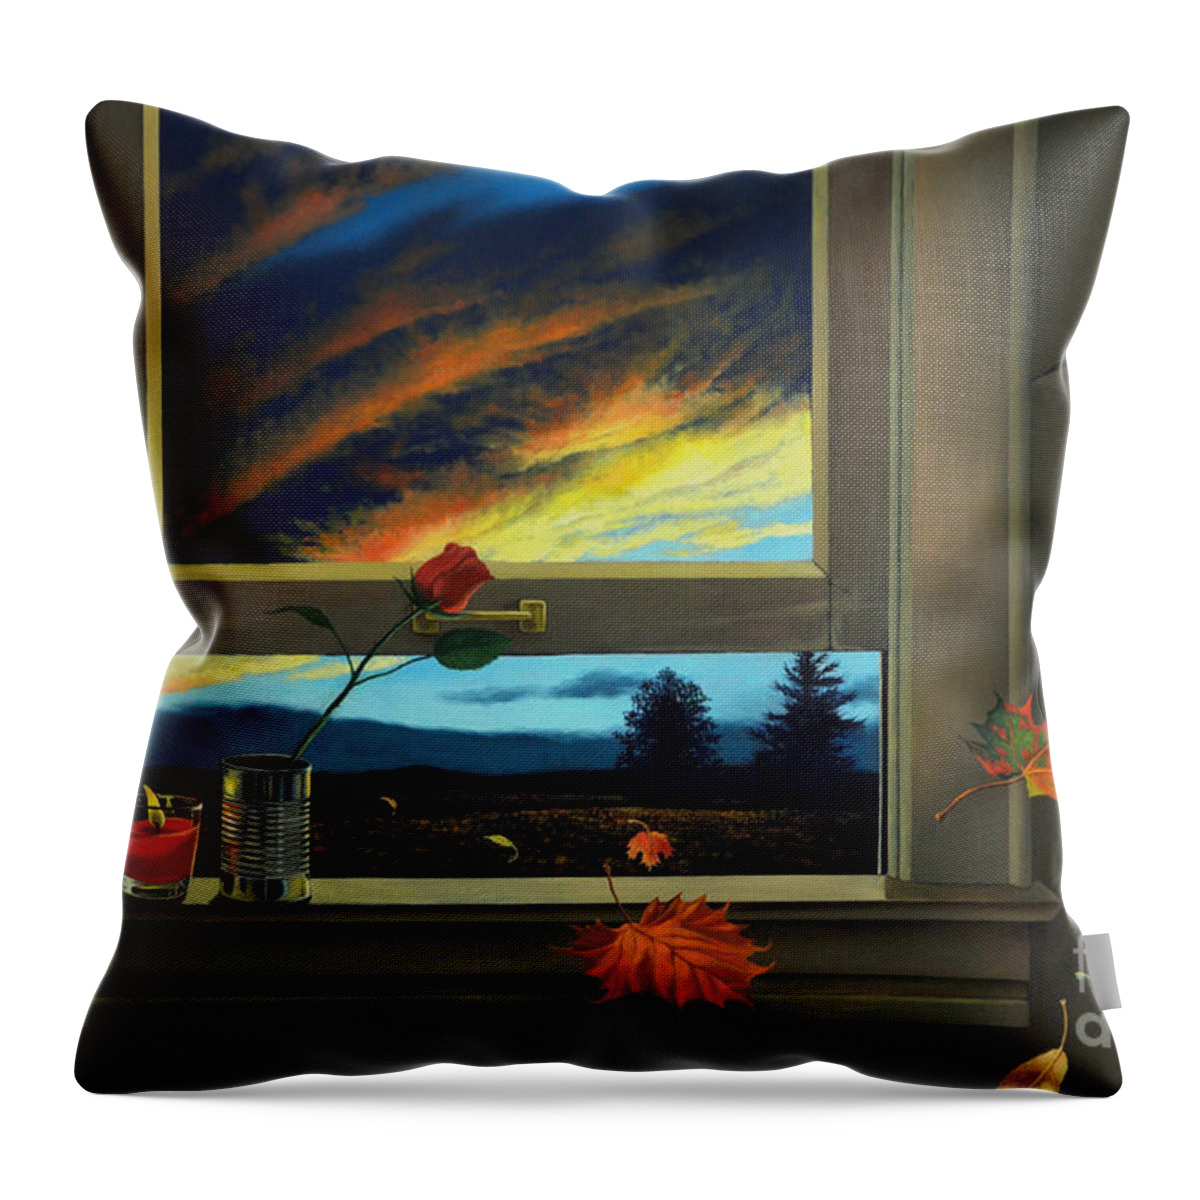 Rose Throw Pillow featuring the painting Late Autumn Breeze by Christopher Shellhammer by Christopher Shellhammer